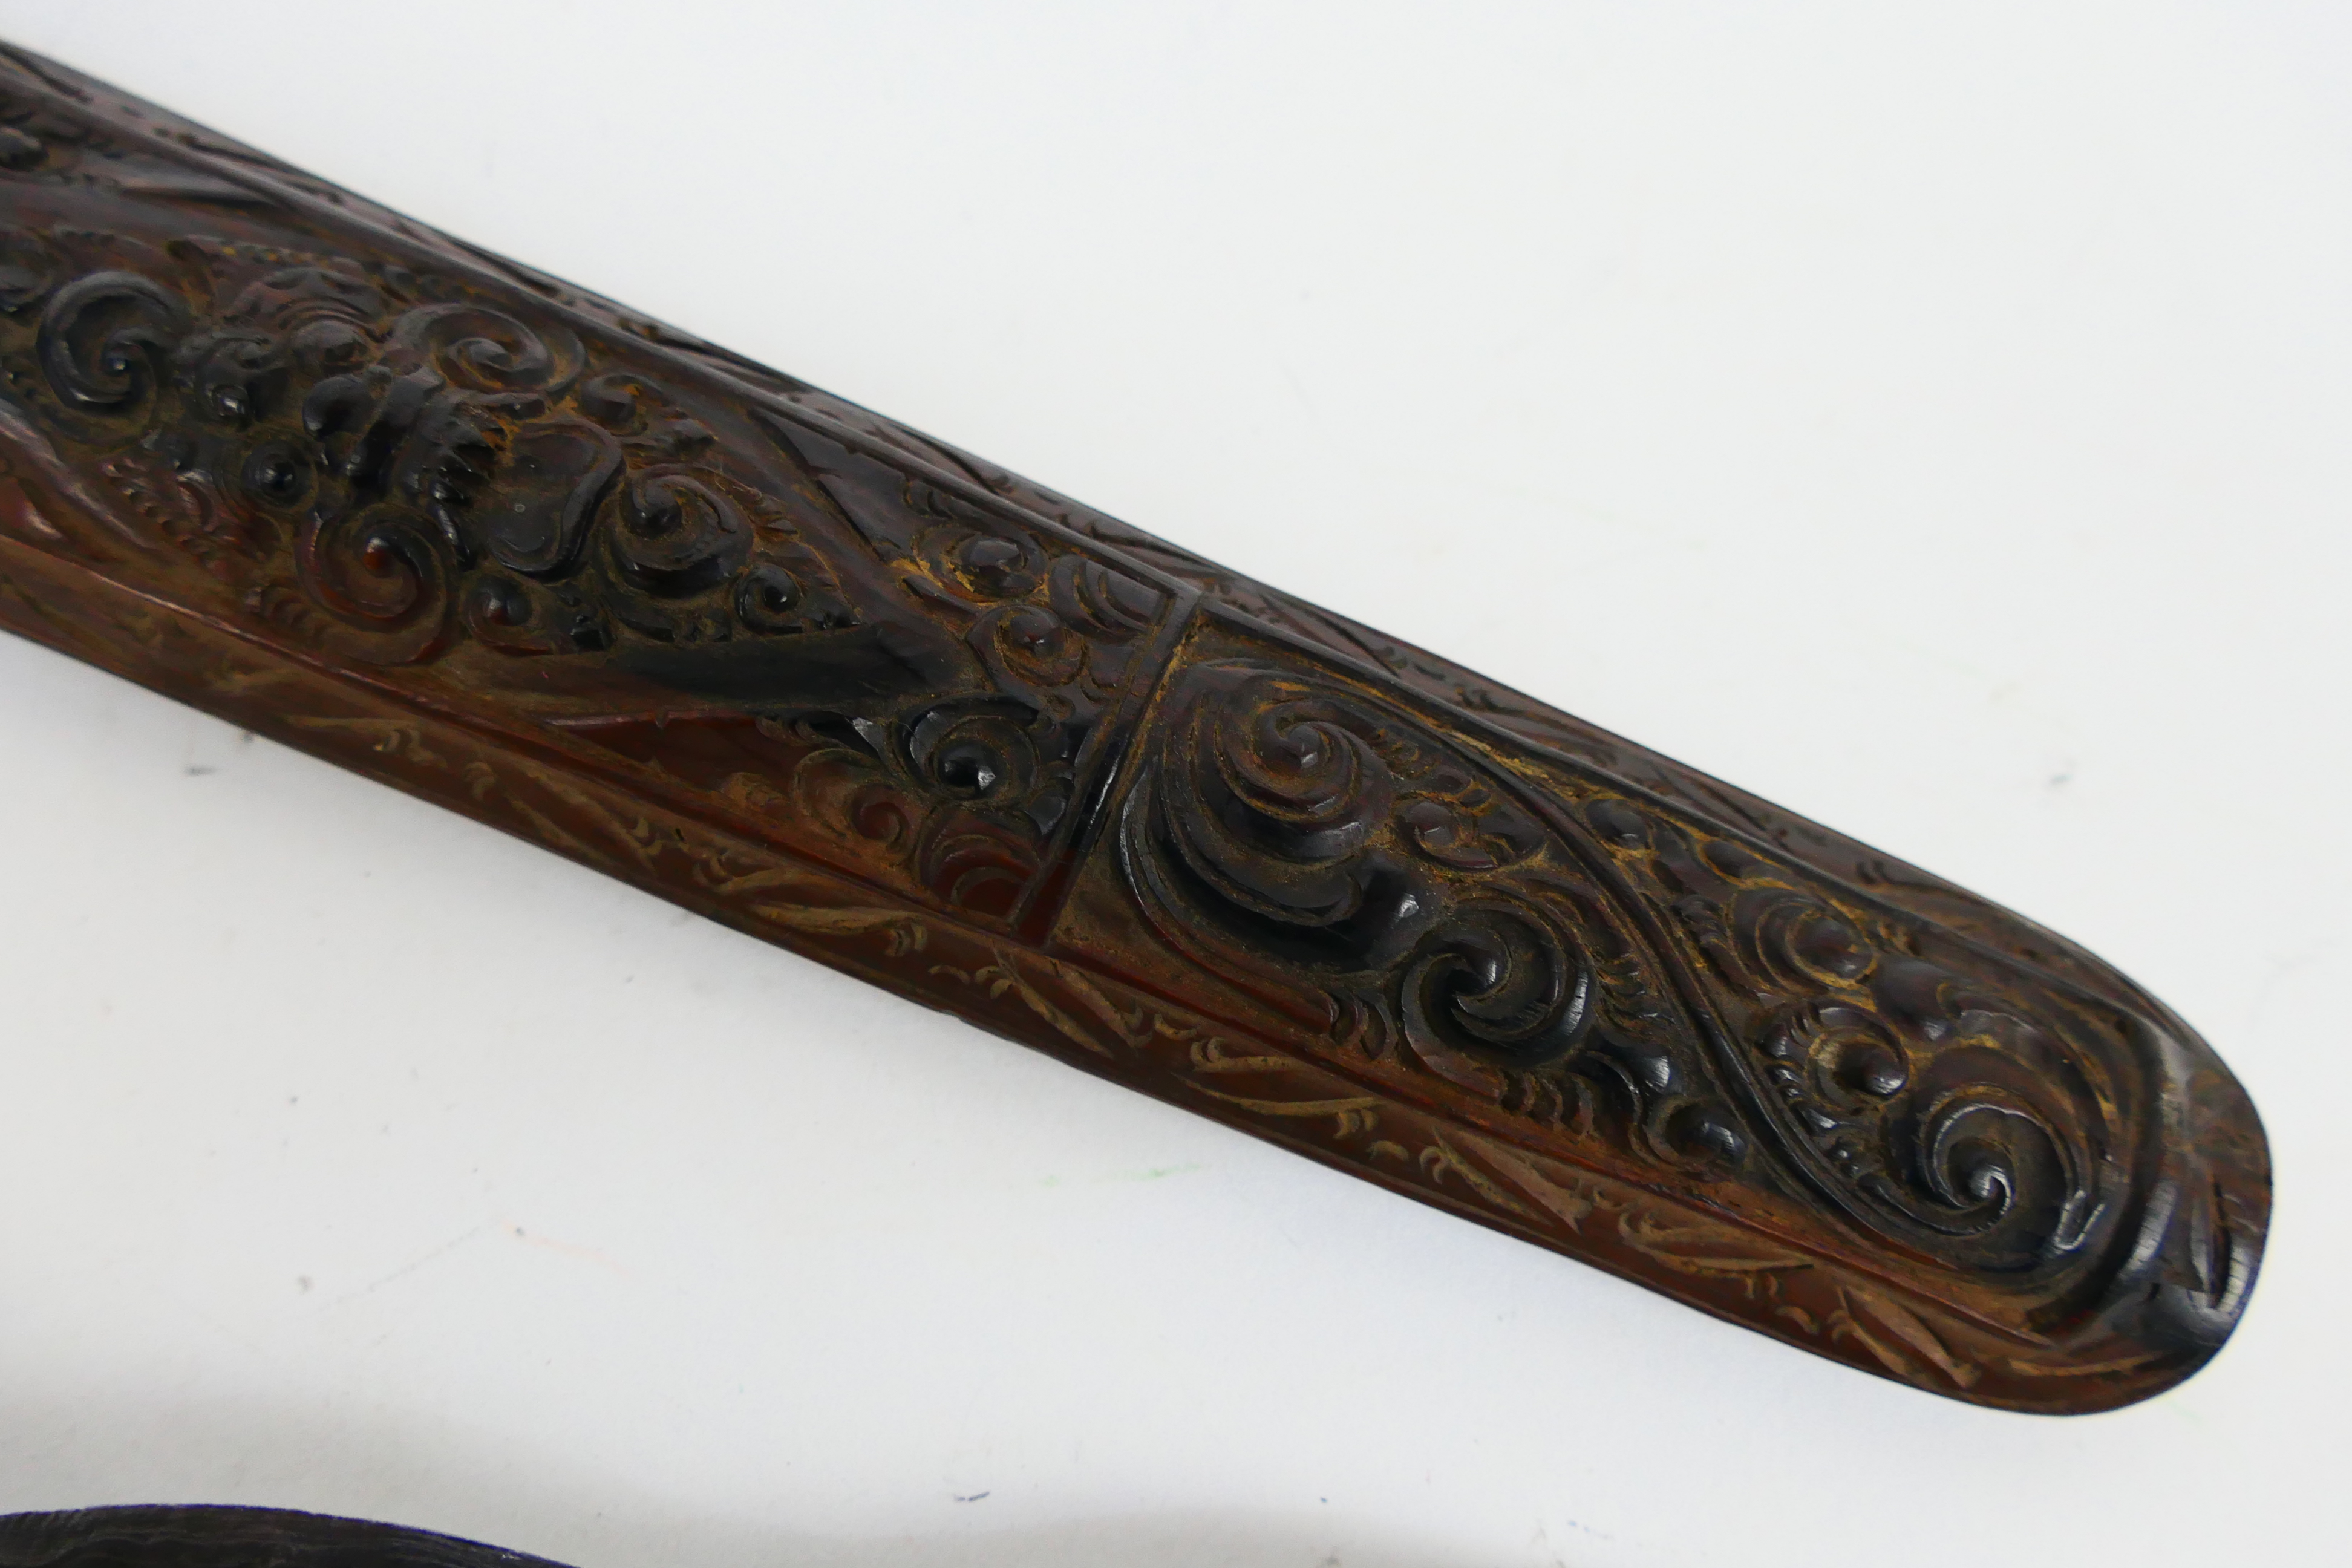 An Indonesian Kris with intricately carved scabbard and hilt, - Image 9 of 9